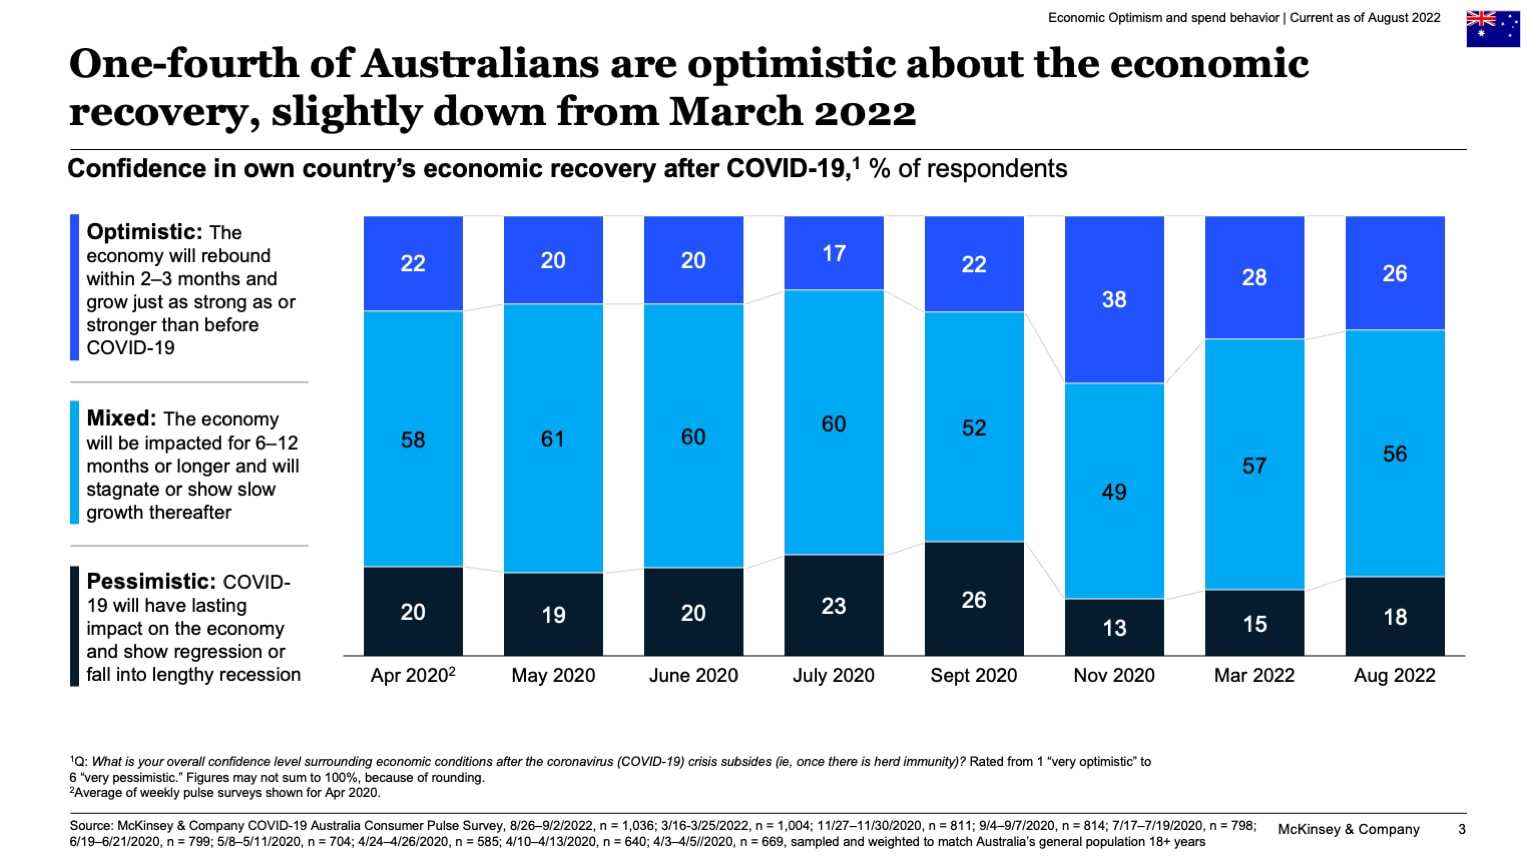 One-fourth of Australians are optimistic about the economic recovery, slightly down from March 2022